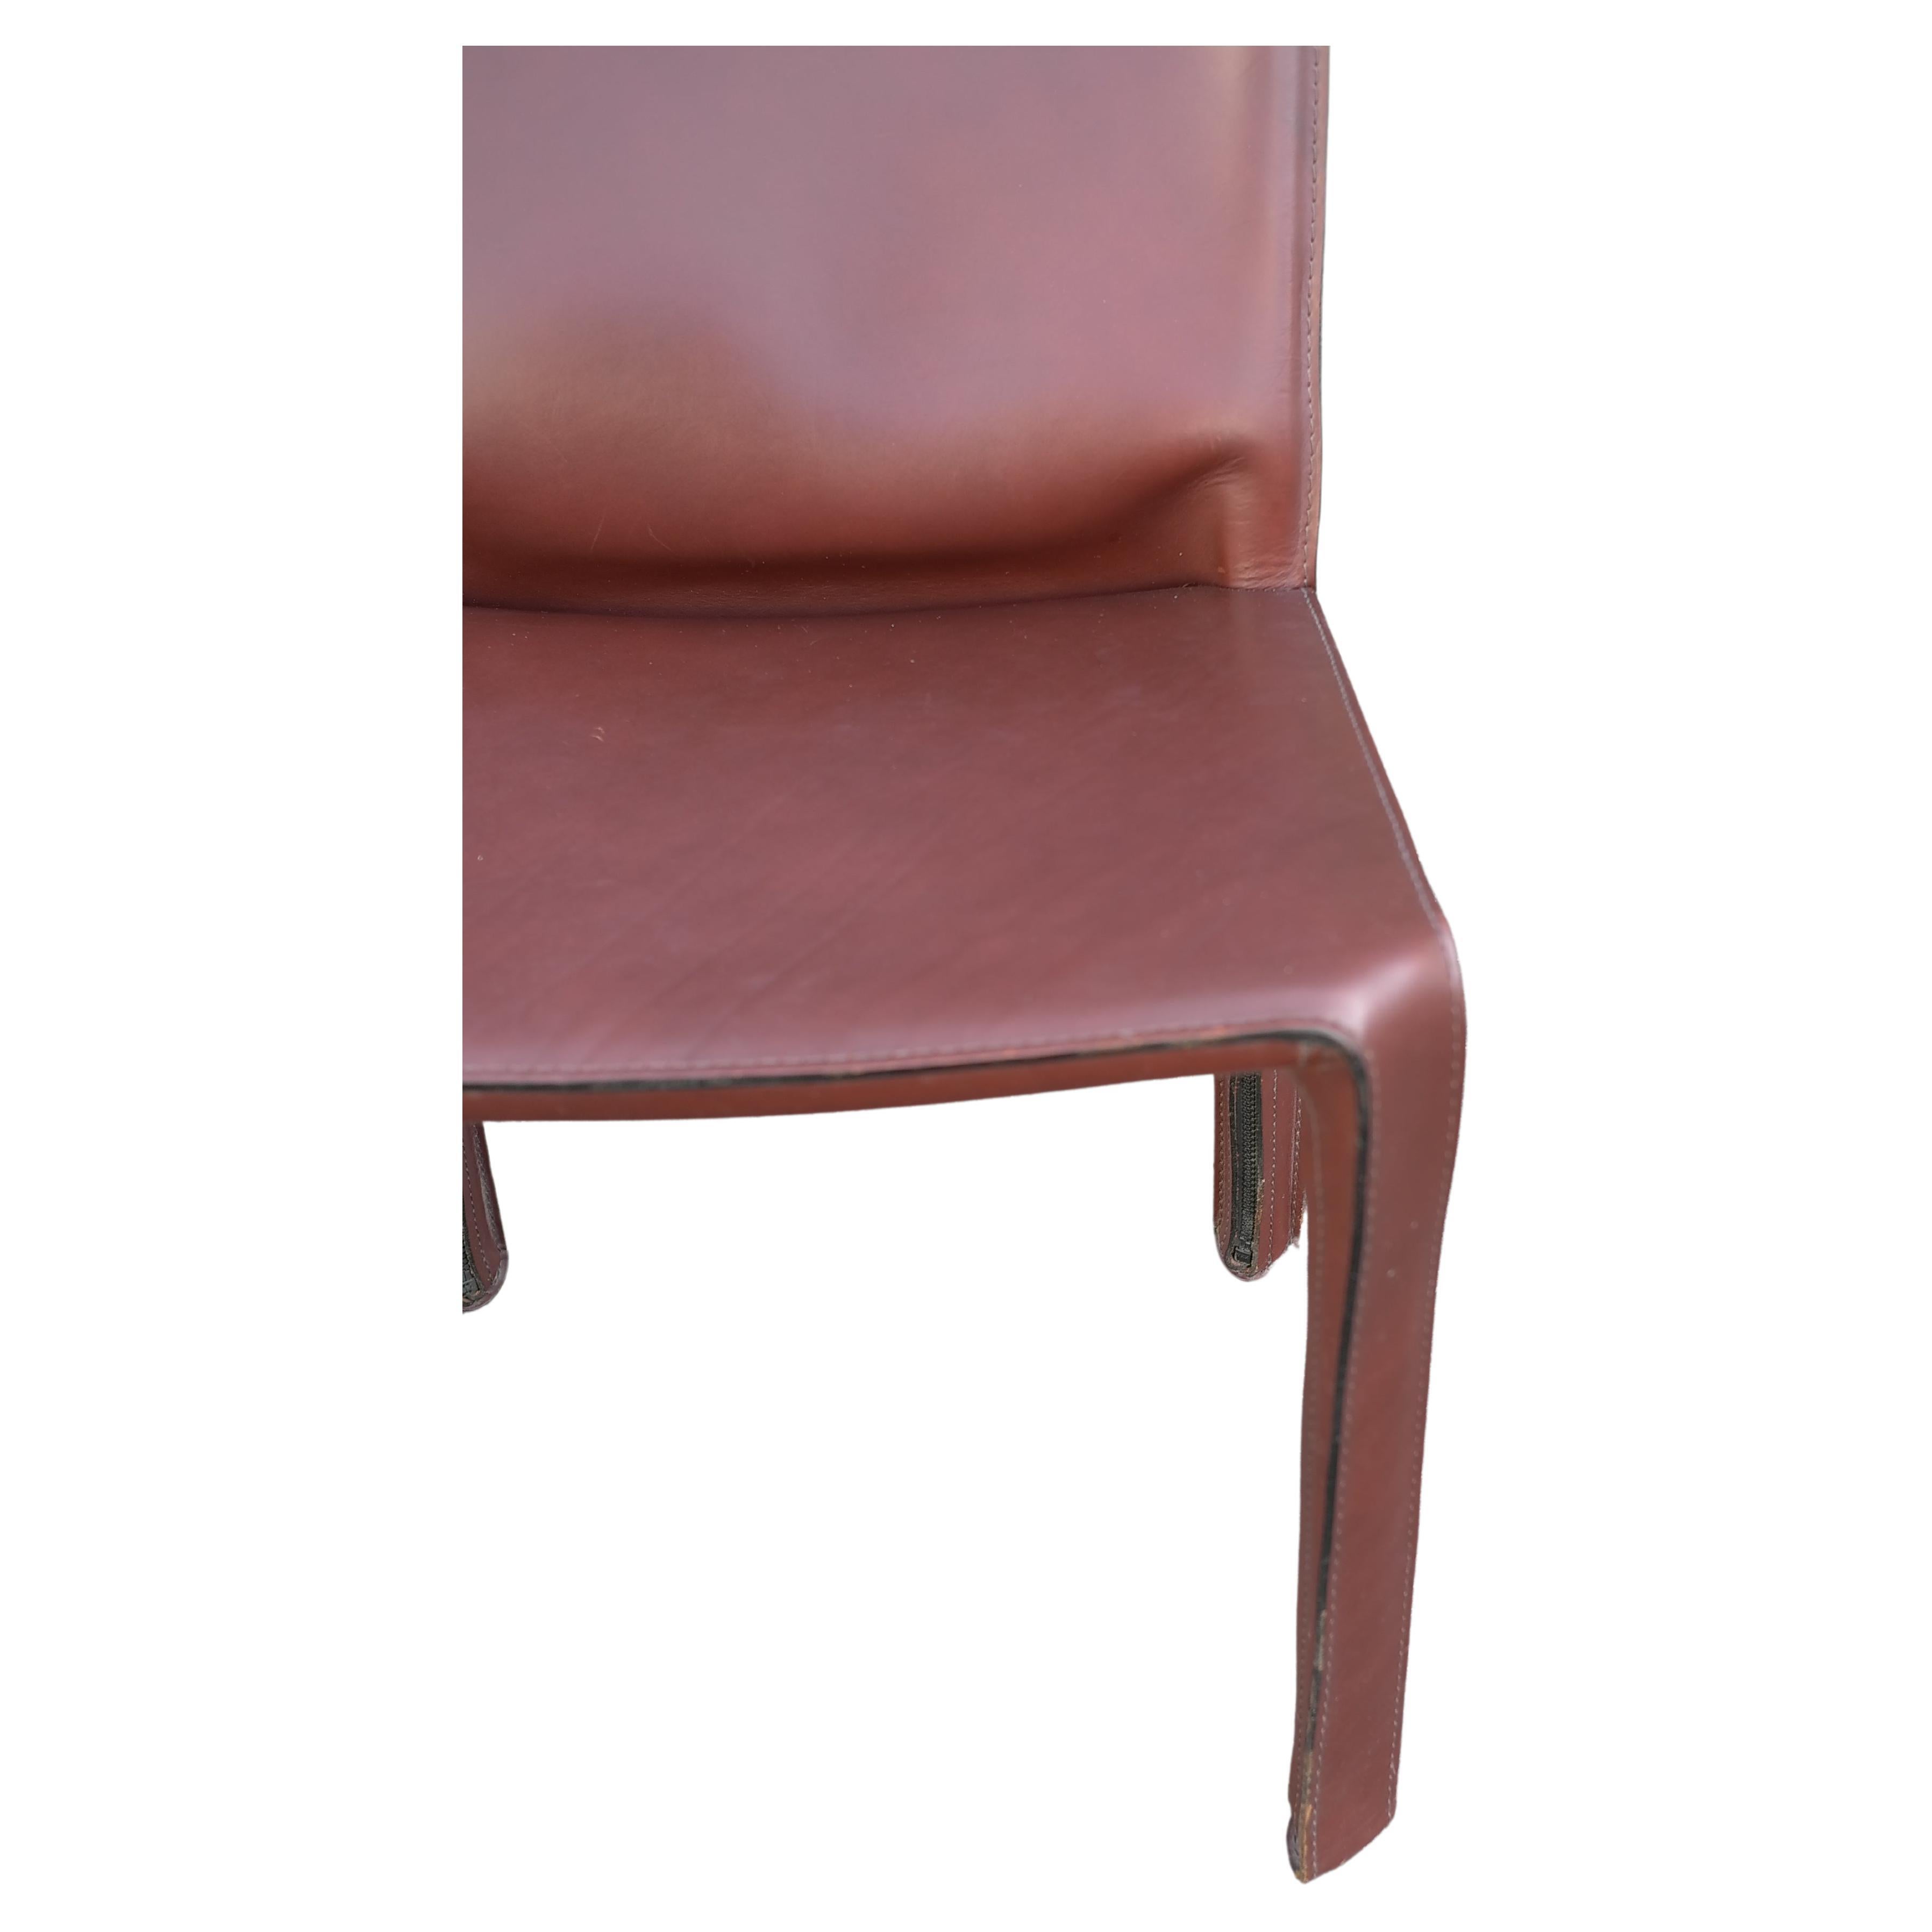 Italian Pair of Chestnut Colored Cab Dining Chairs by Mario Bellini for Cassina For Sale